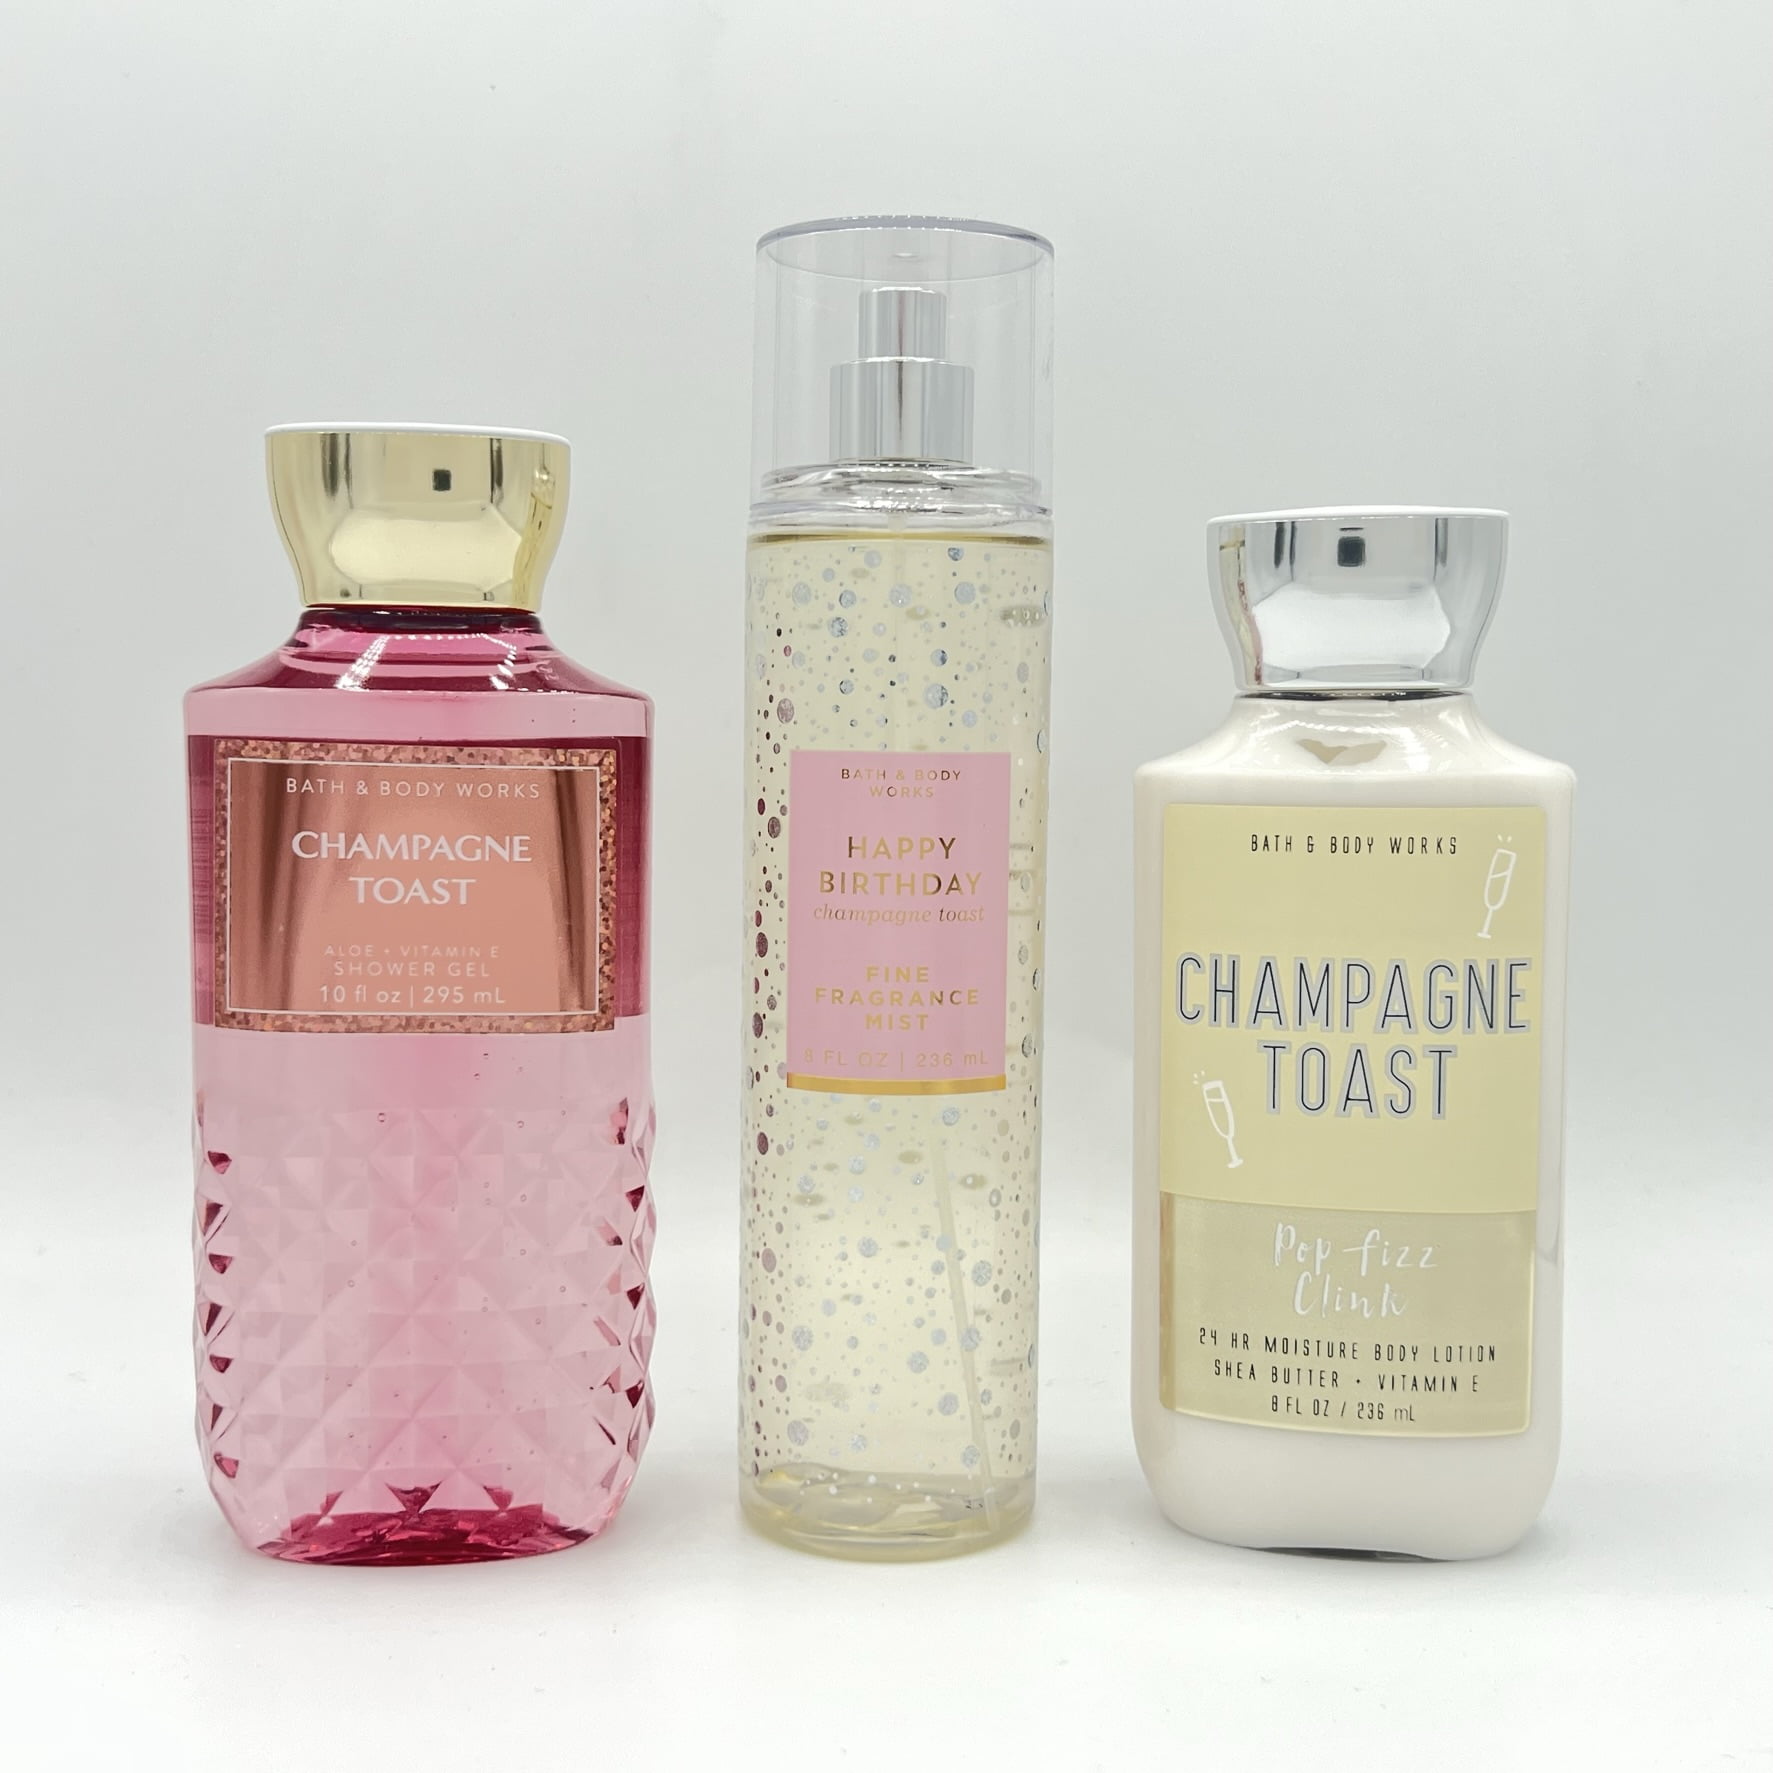 Bath and Body Works Champagne Toast Perfume is a Thing Now But Can